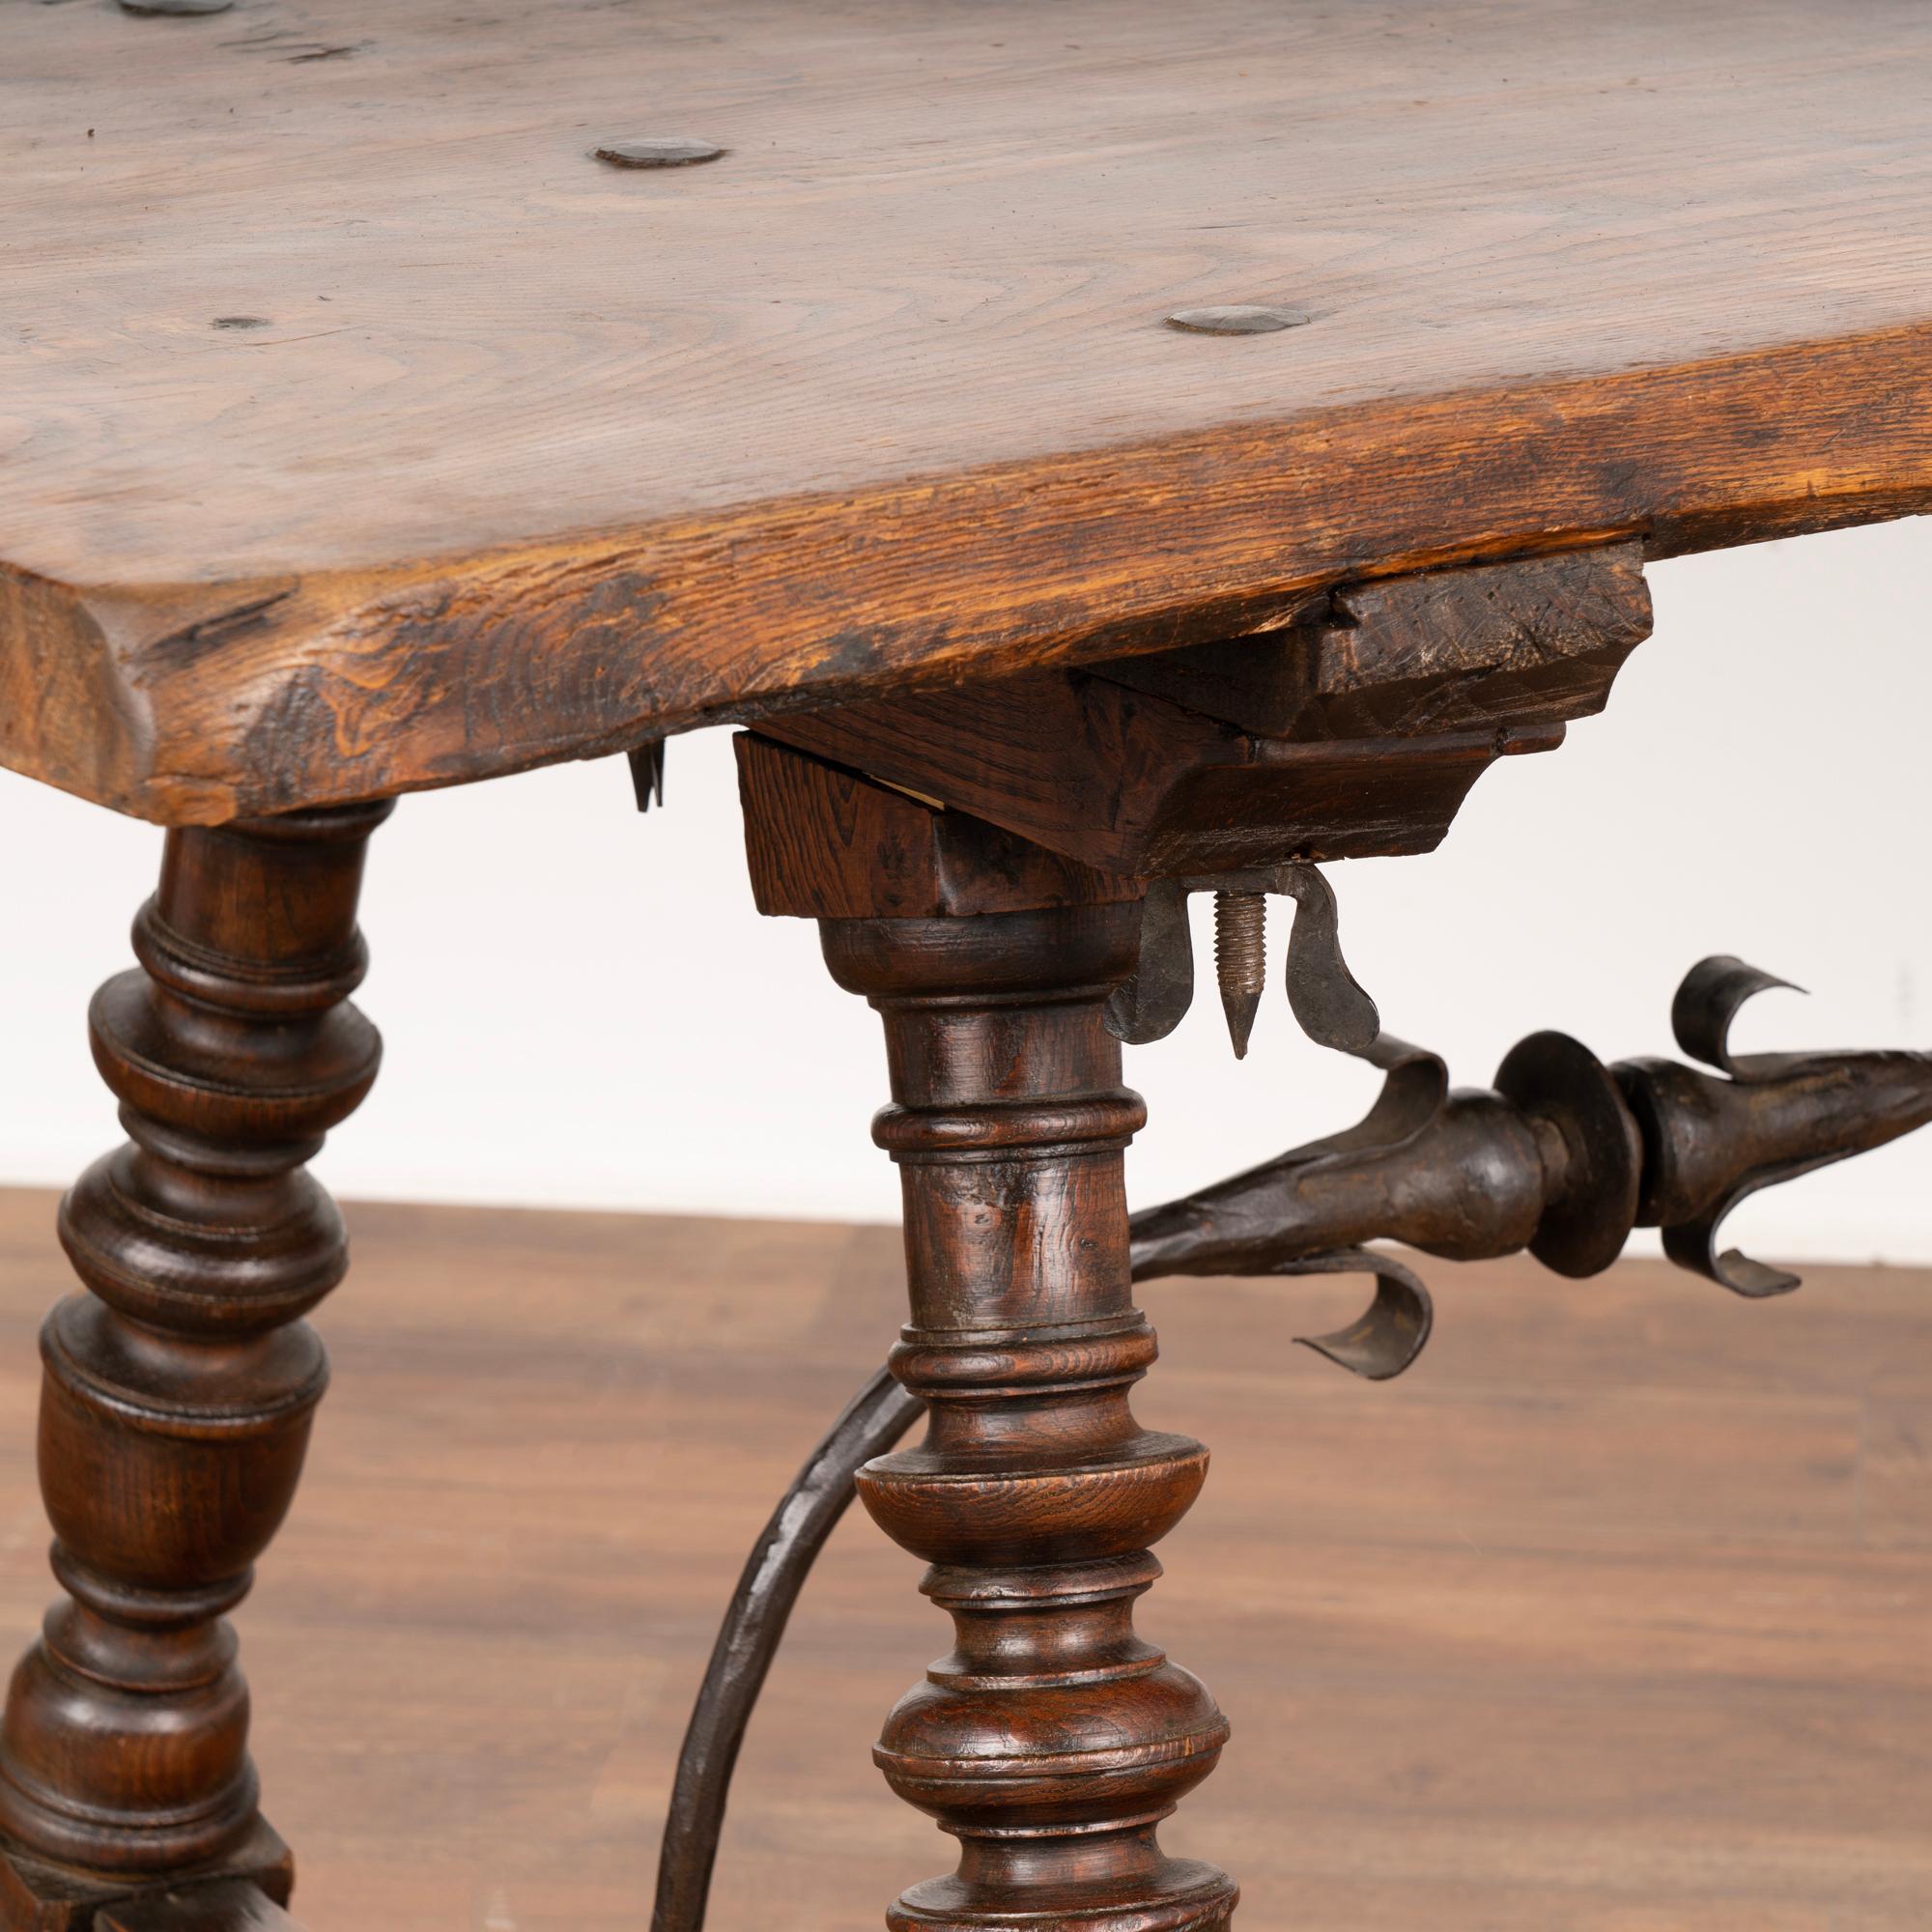 19th Century Antique Dining Table with Turned Legs and Scrolled Iron Stretcher from Spain